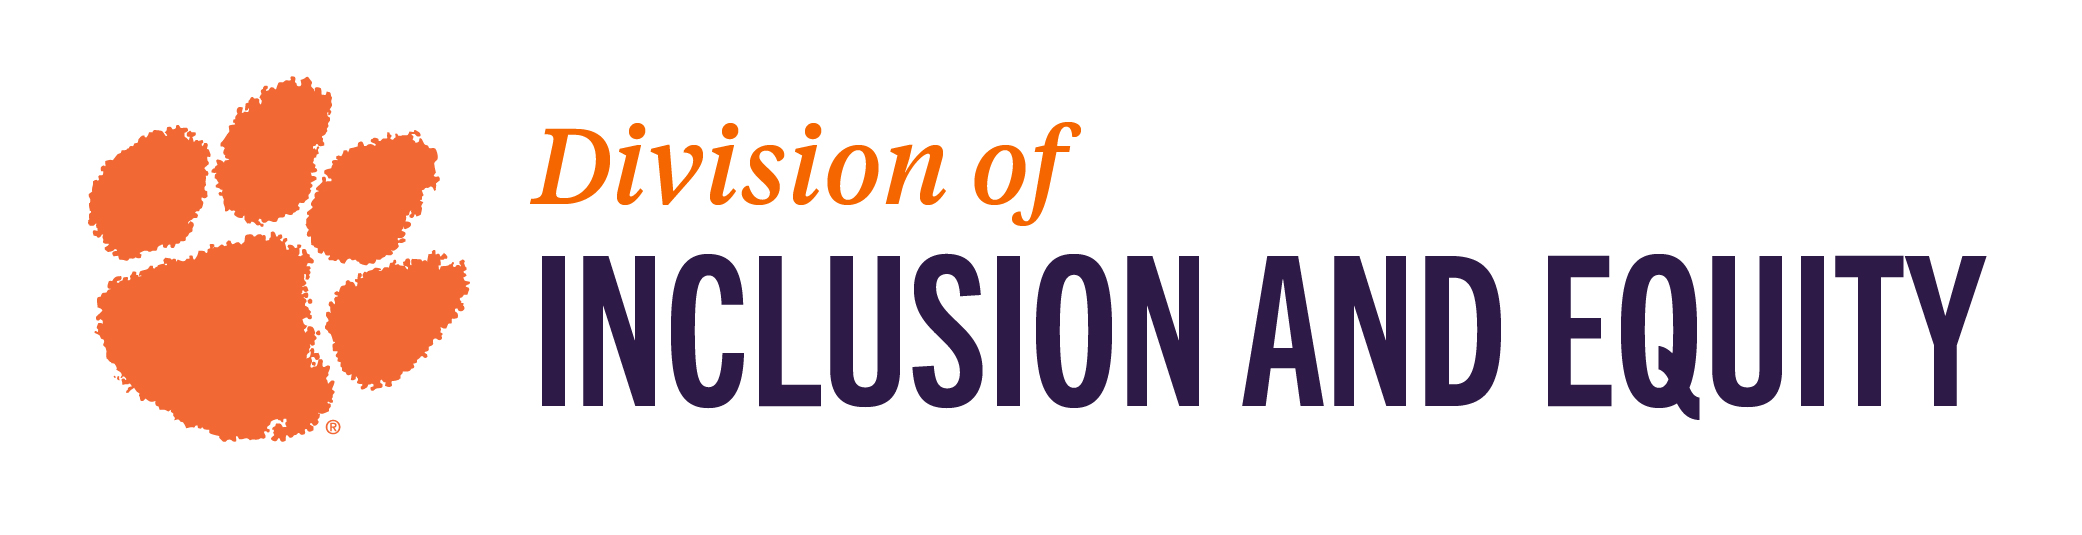 Division of Inclusion and Equity